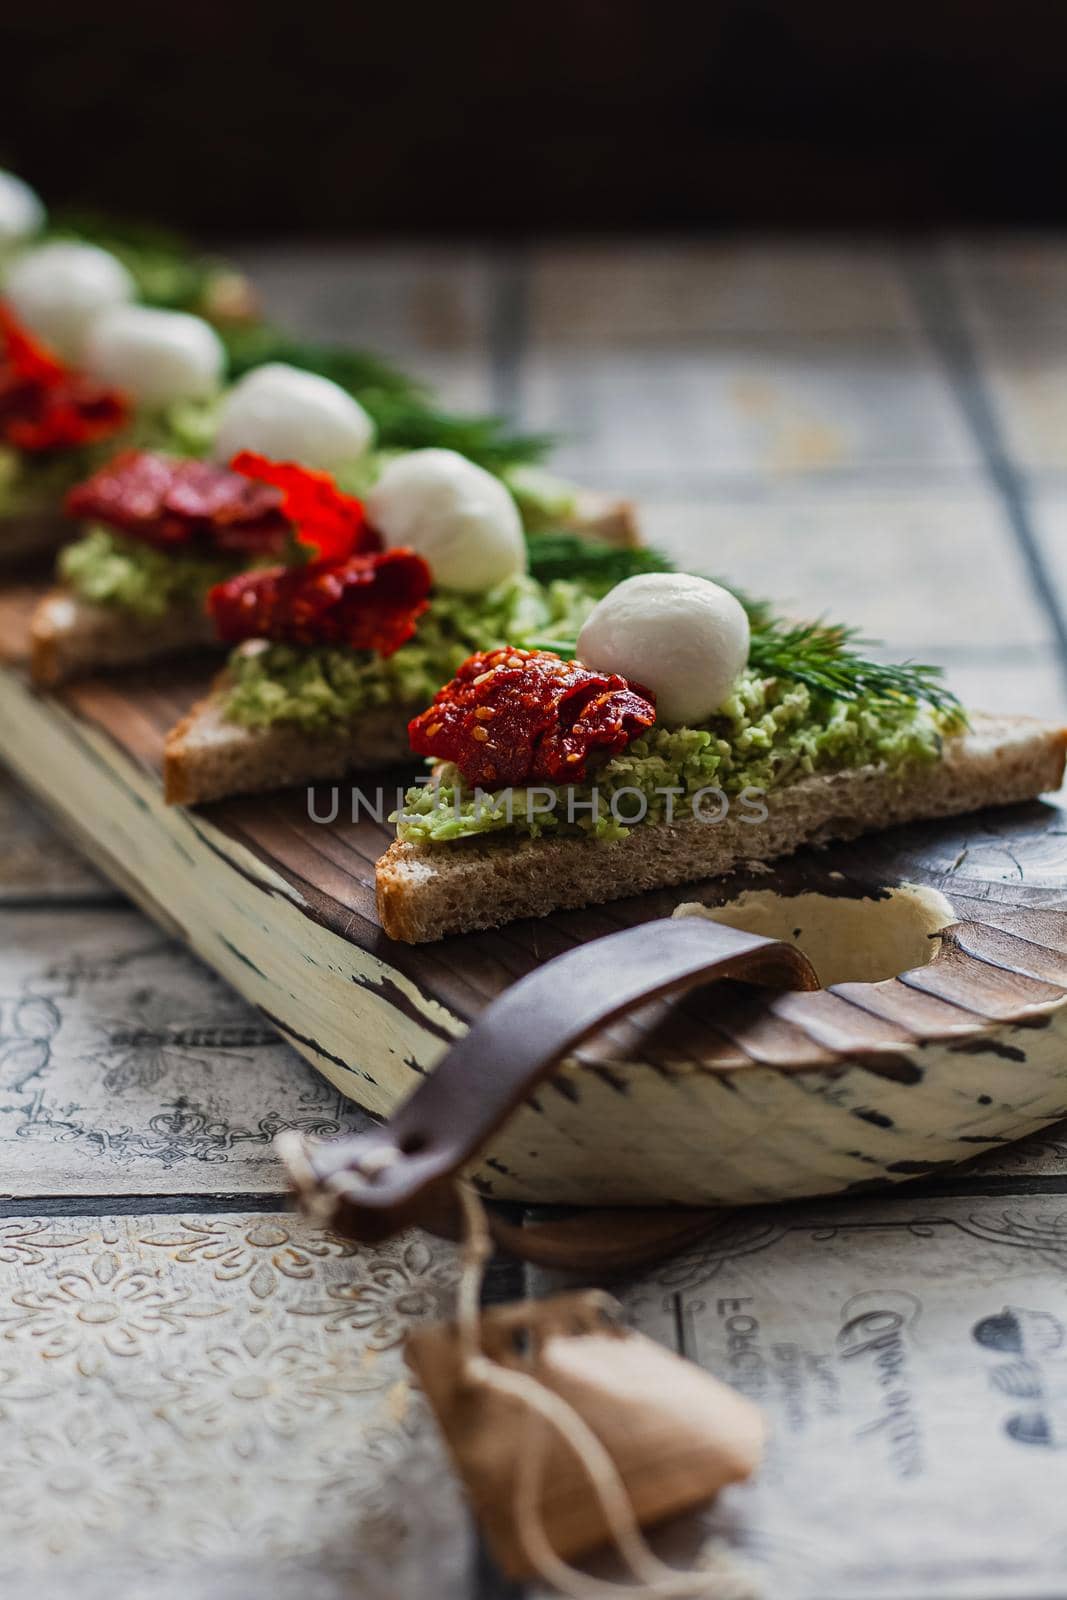 Mini triangle canapes bruschetta with avocado, mozarella and dried tomatos on the rustic board on the vintage tiled background.